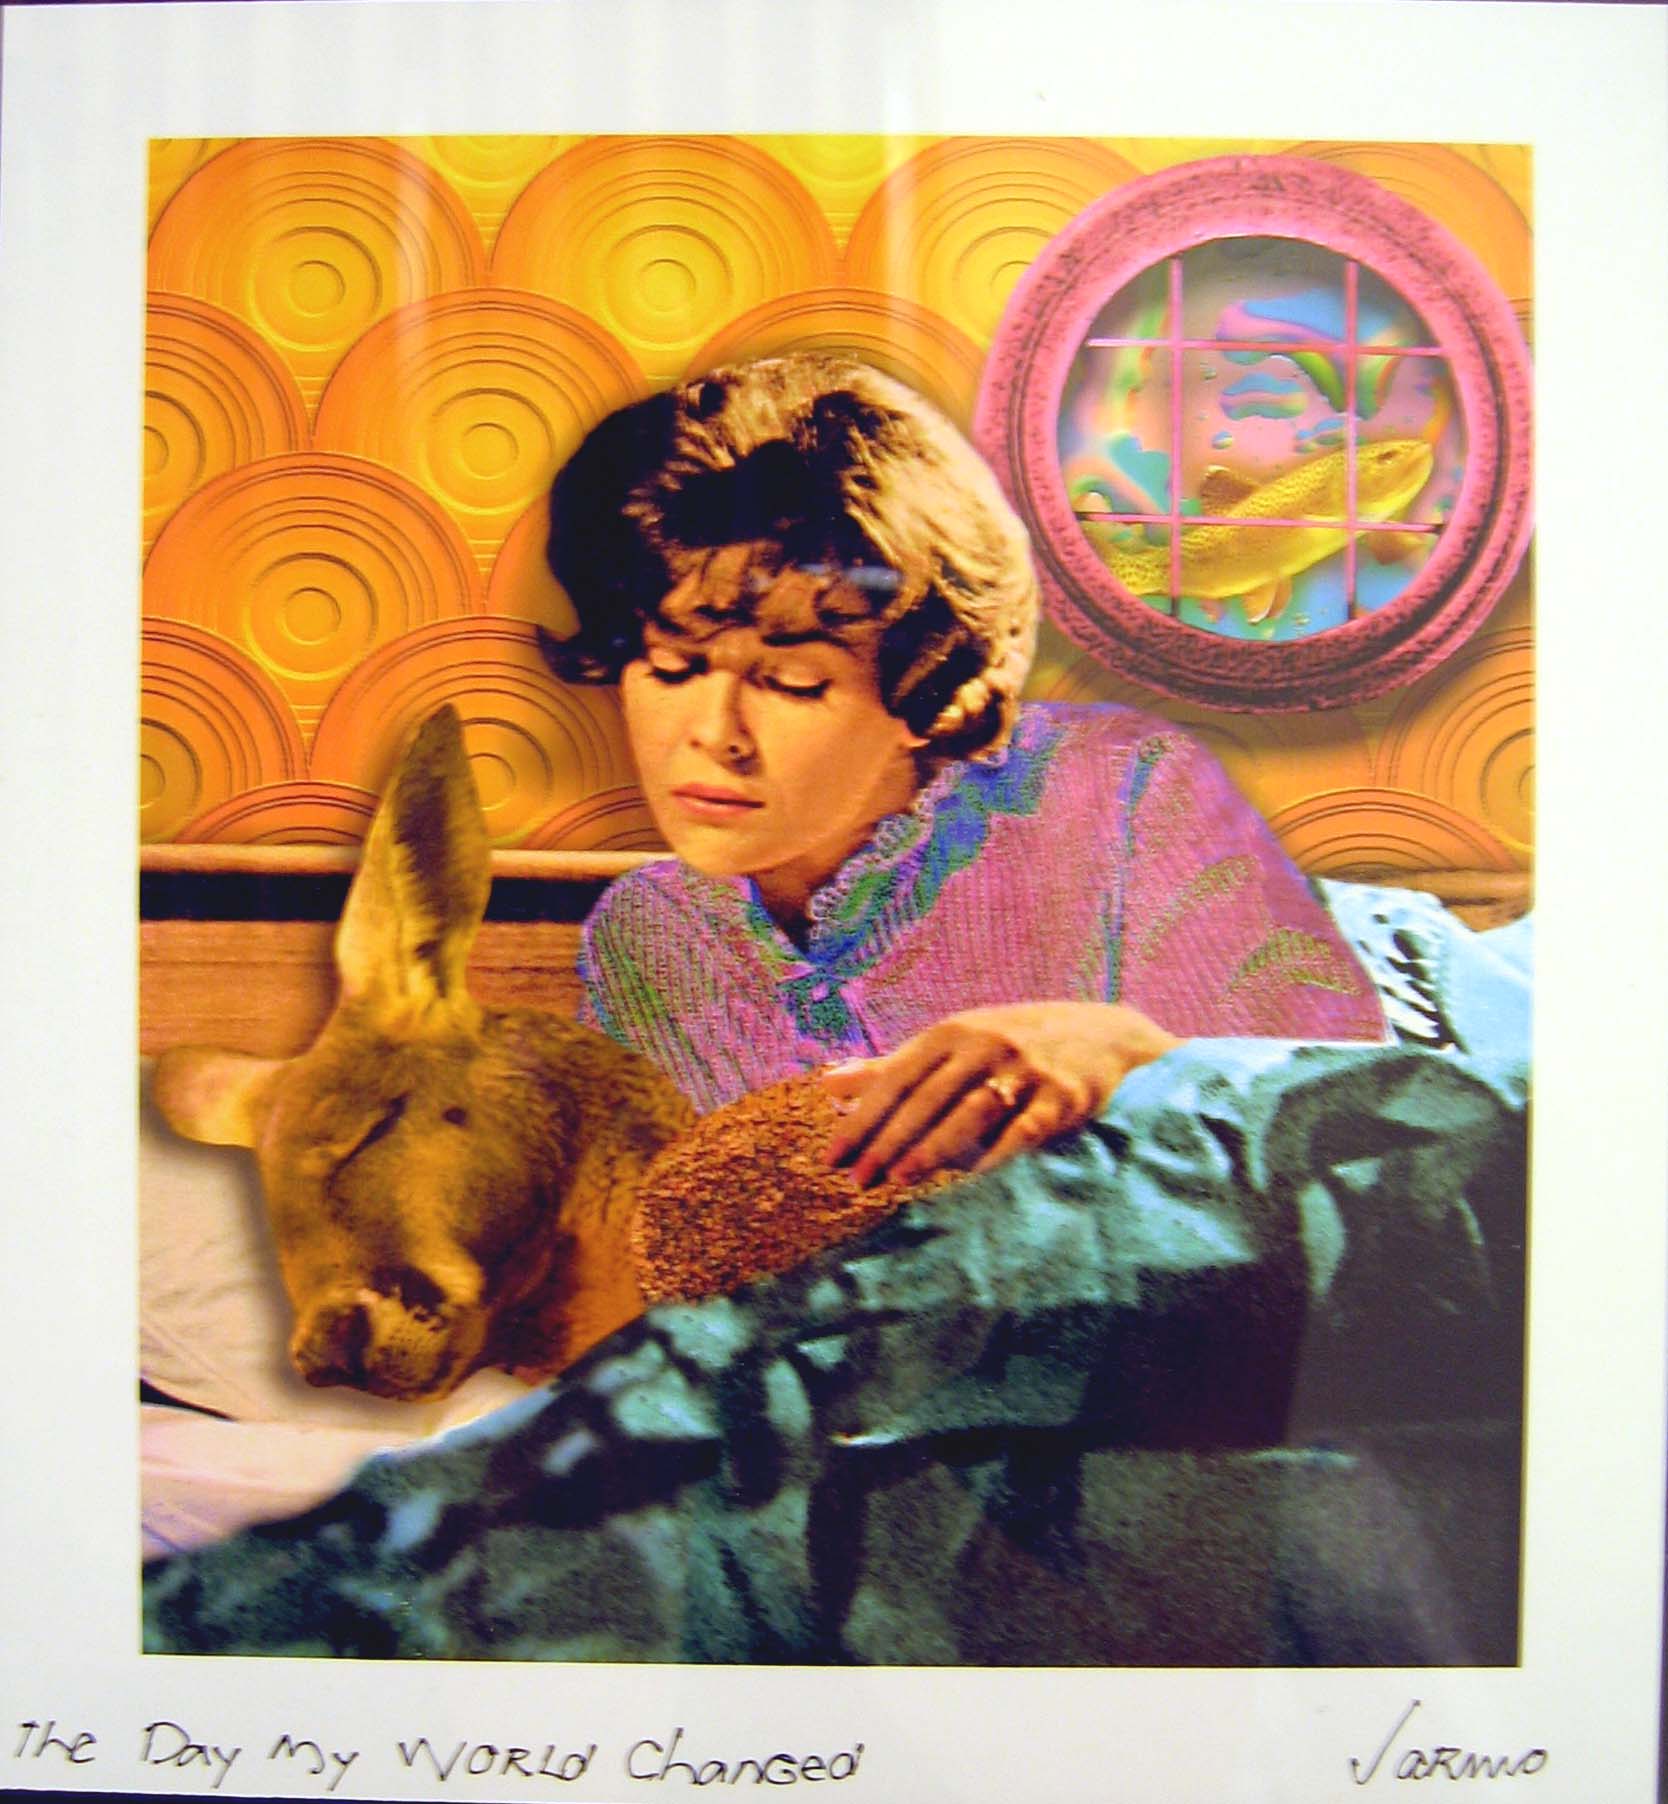 digital collage of a woman tucking a kangaroo into bed. orange, scalloped wallpaper in background. Window on wall shows a fish swimming outside. Hand written text at bottom of image says: The Day My World Changed. Jarmo